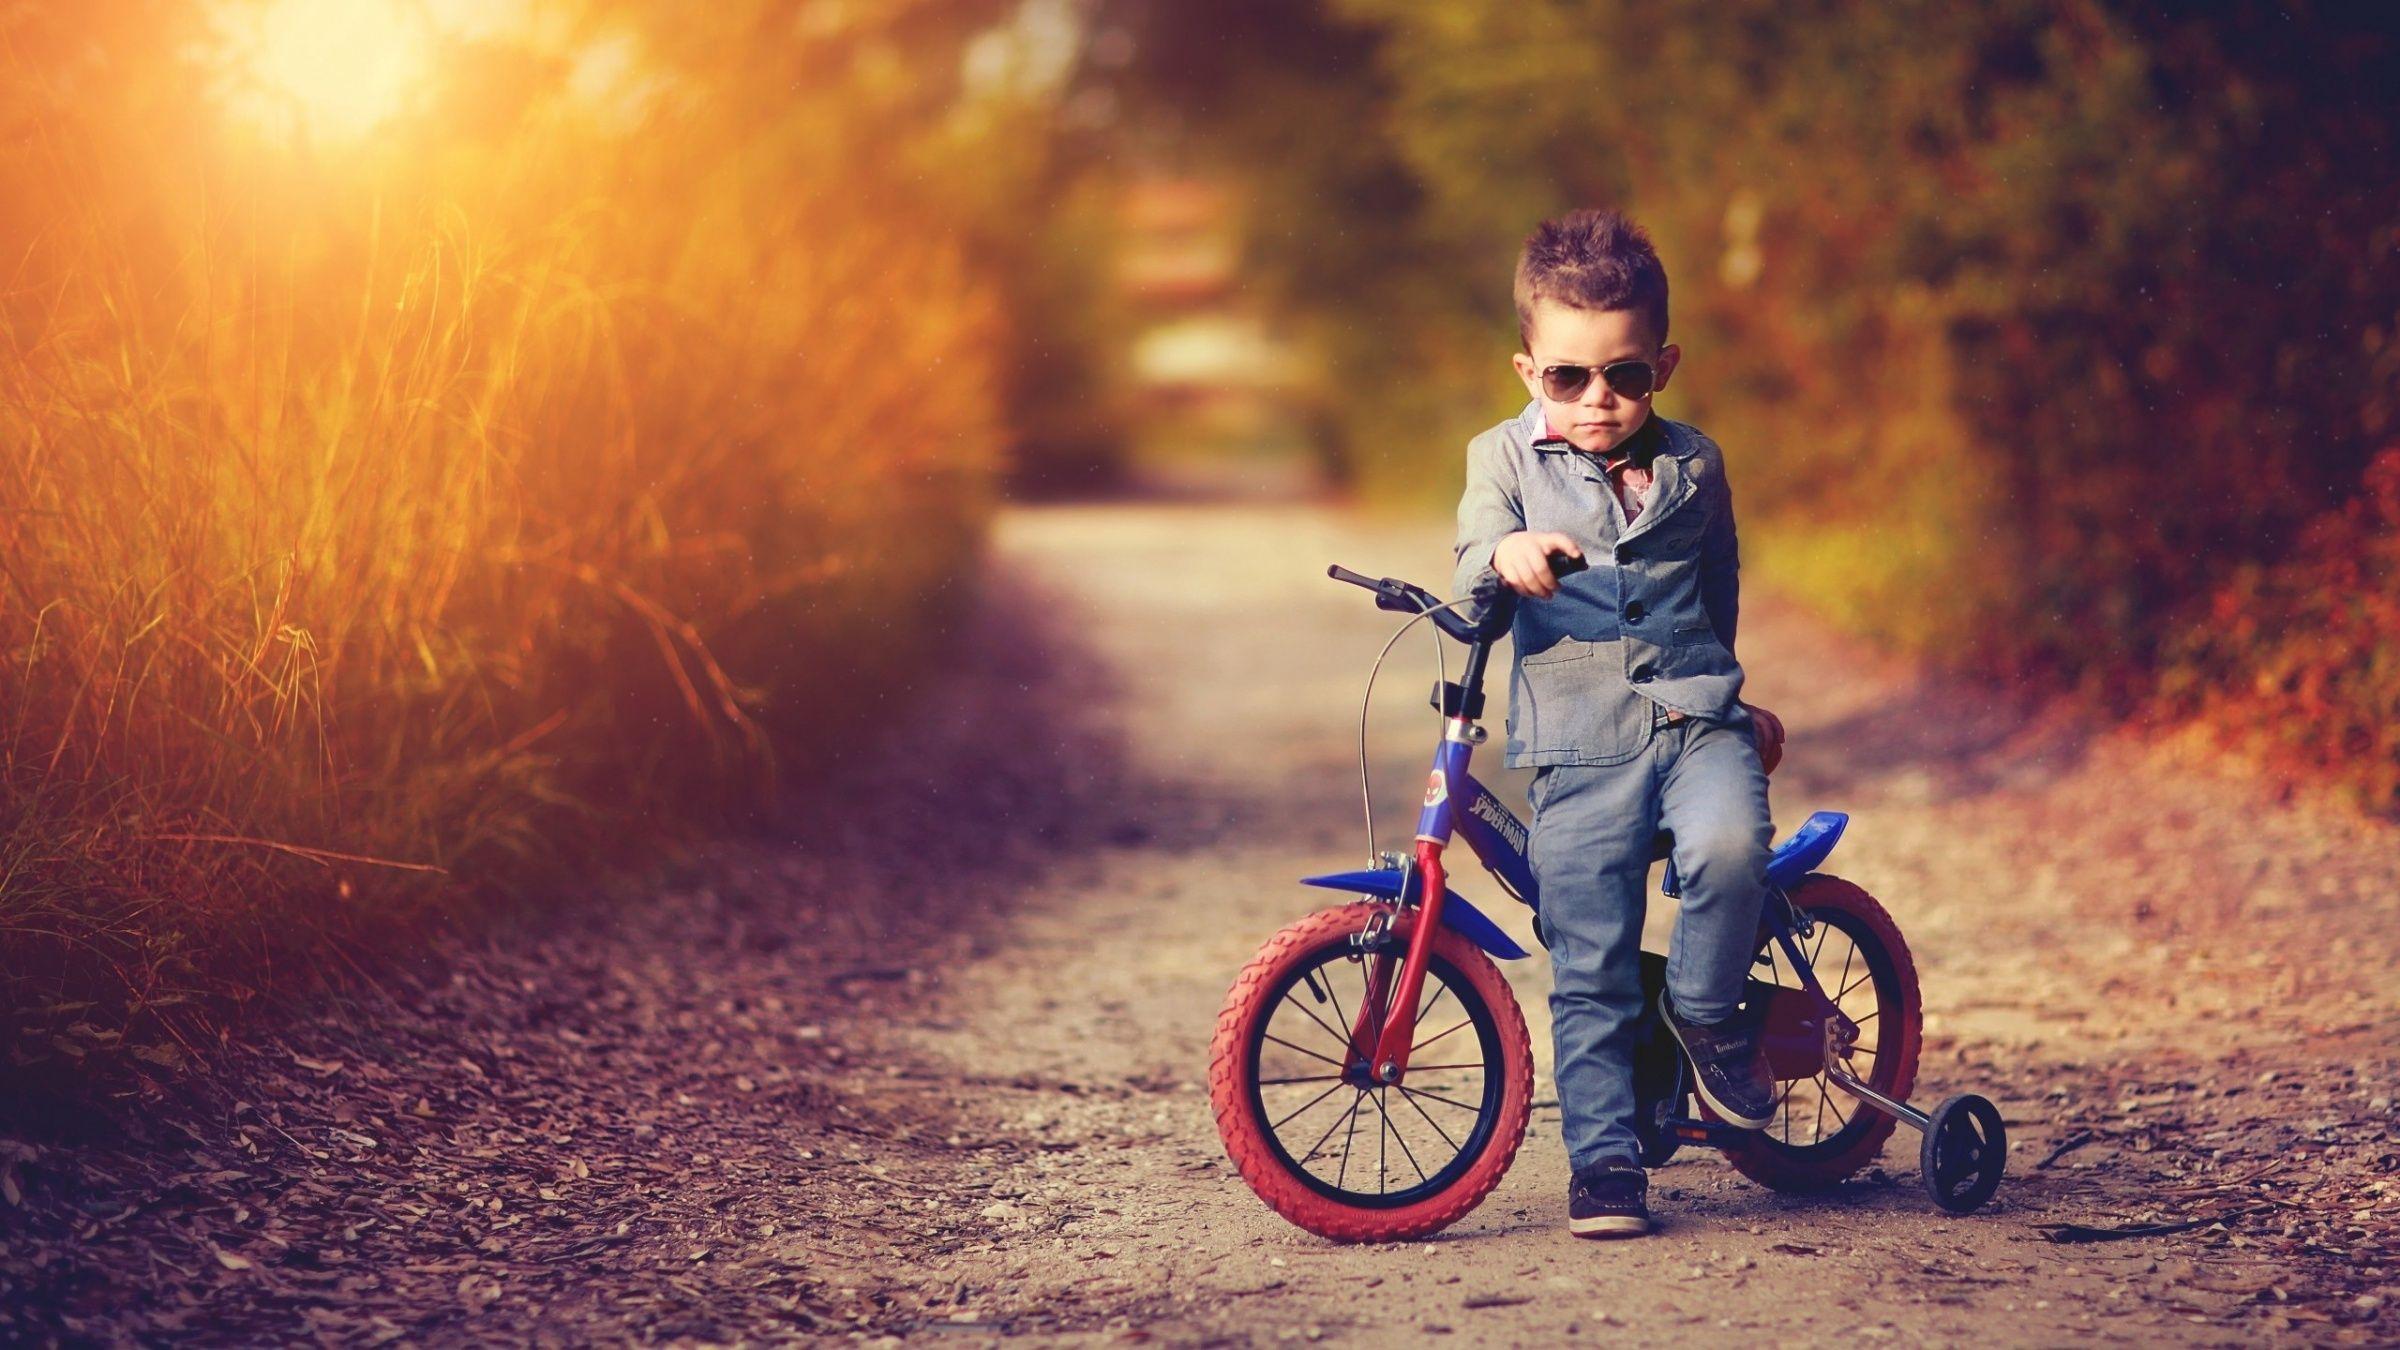 Boy Nice Costume And Bicycle Wallpaper